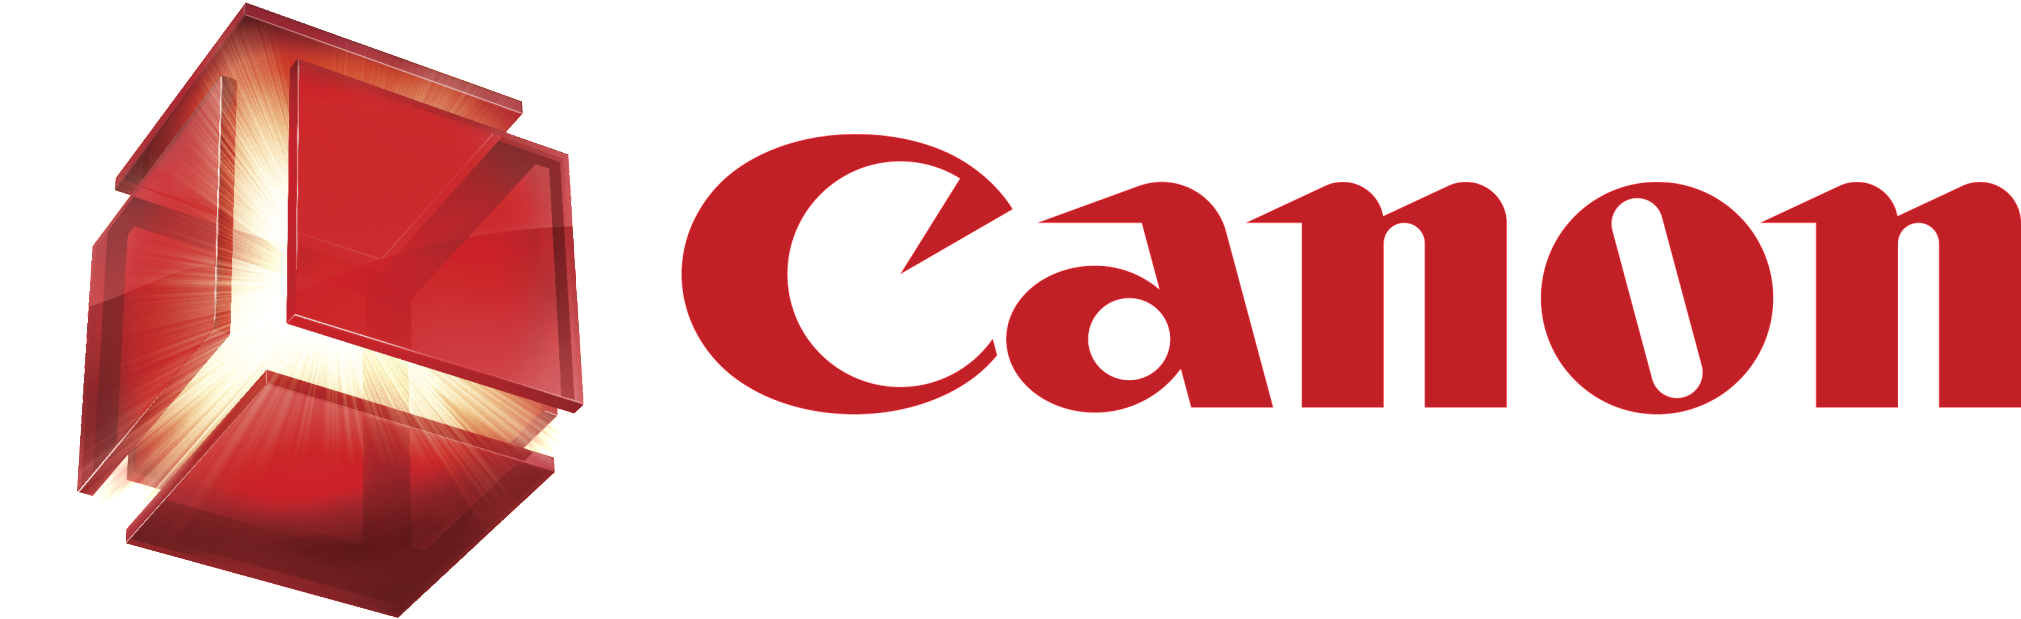 Canon See Impossible Logo PNG image